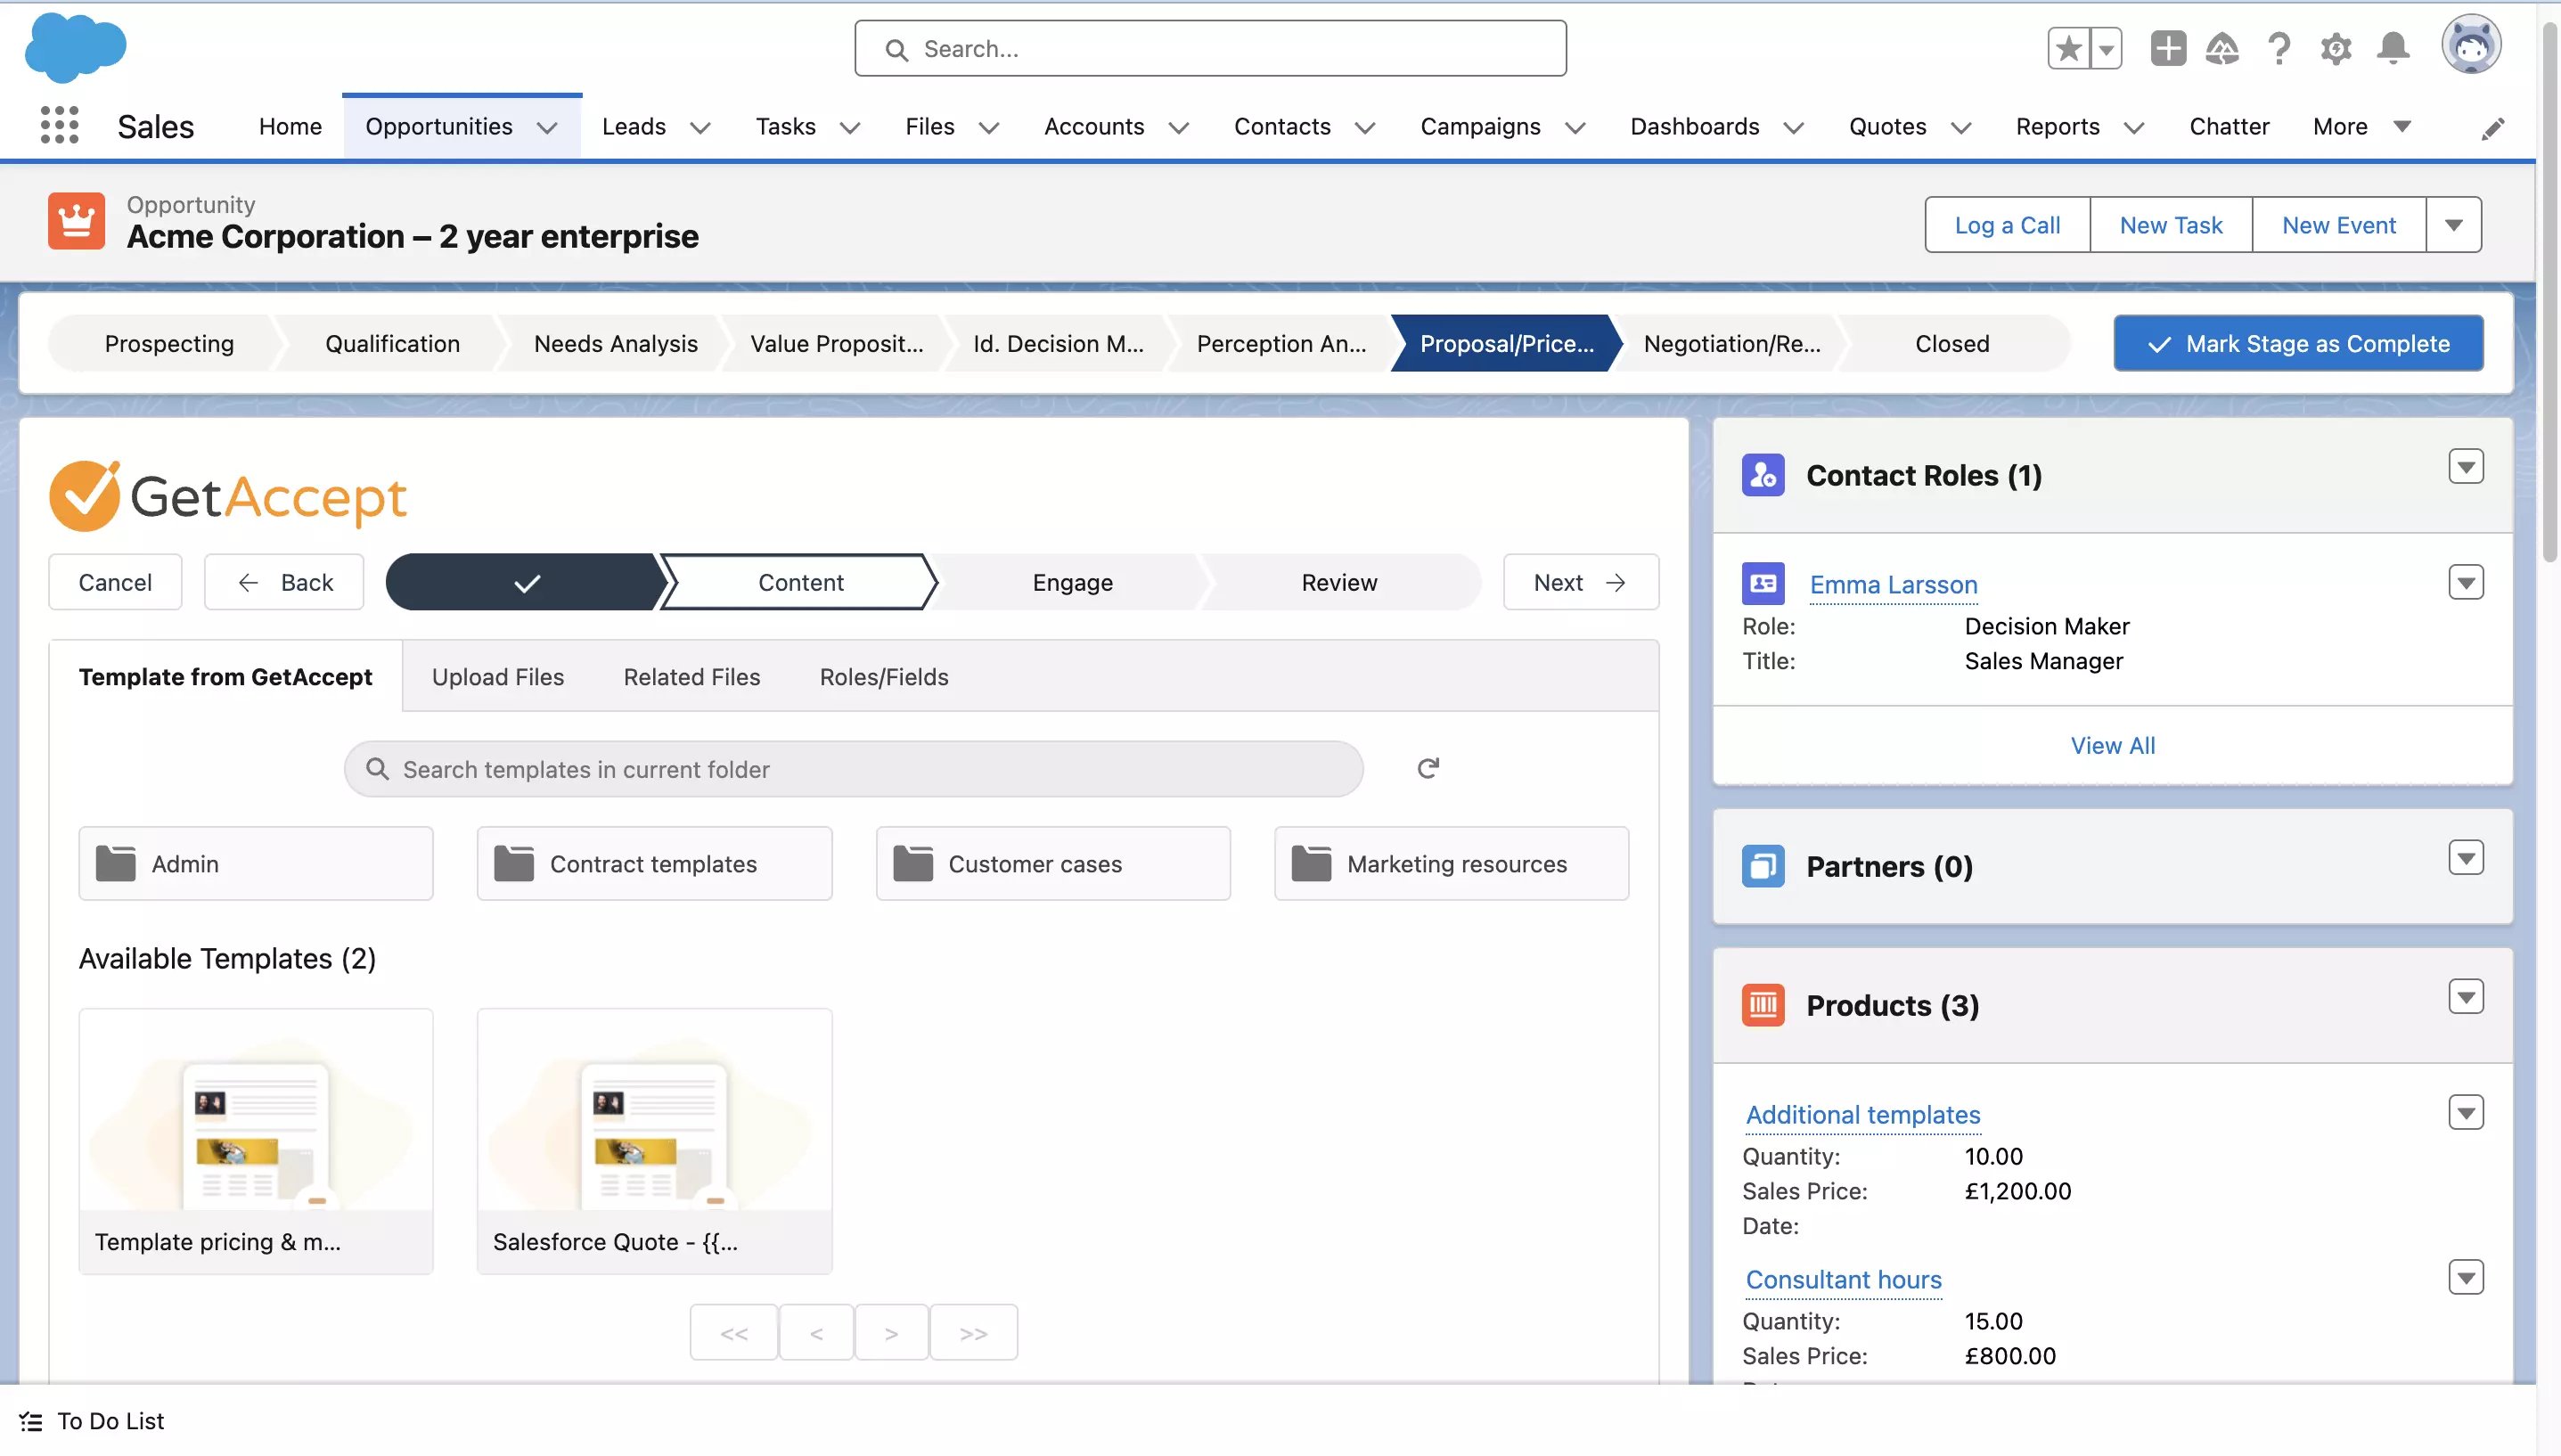 3. Sales collateral management in Salesforce with GetAccept